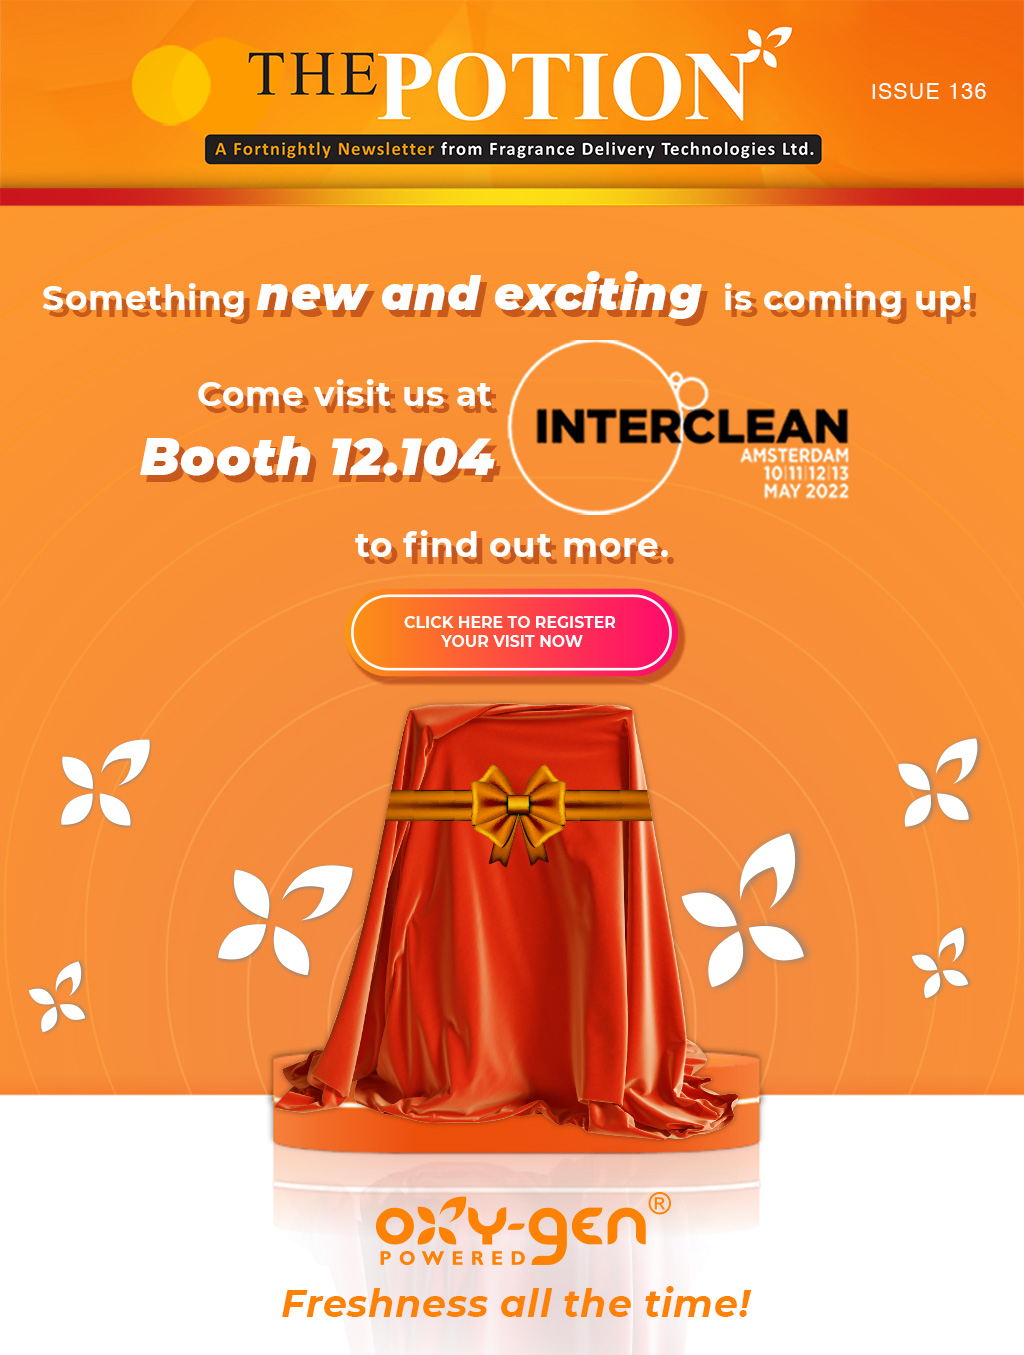 Visit us at Interclean Amsterdam for something exciting! - The Potion Issue 136